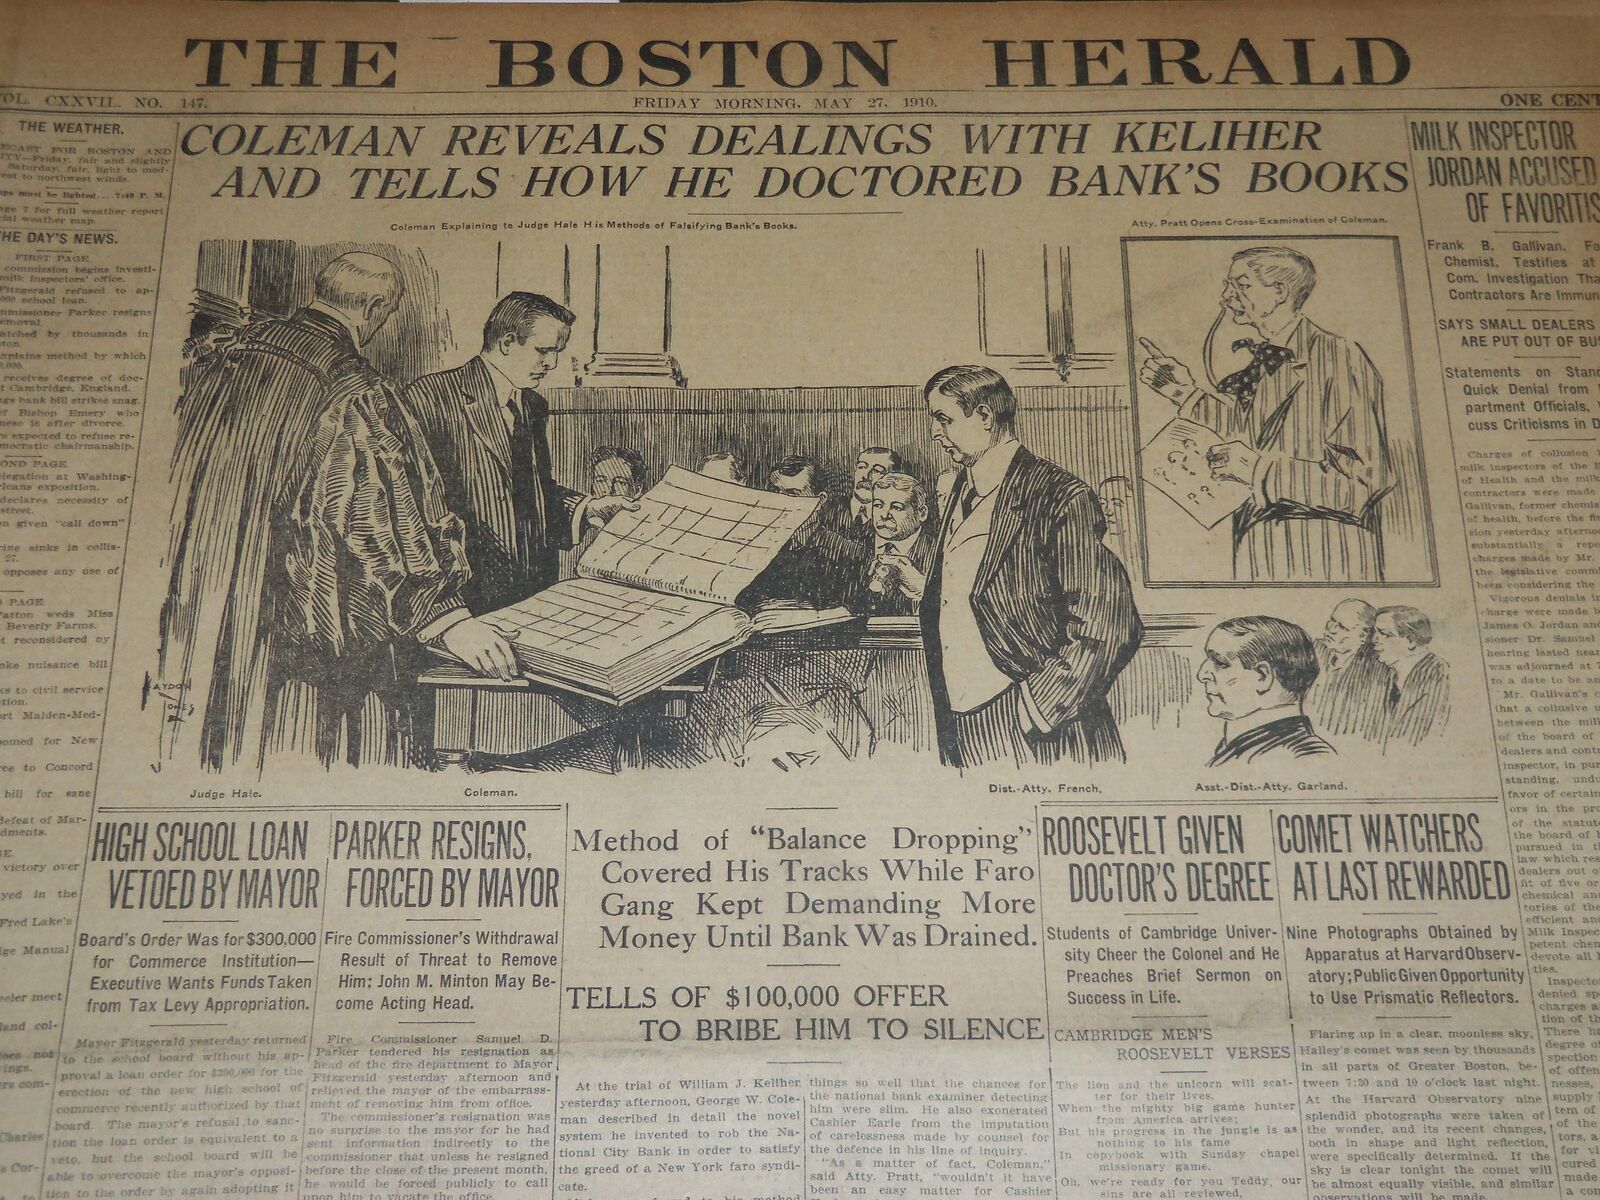 1910 MAY 27 THE BOSTON HERALD - COLEMAN REVEALS DEALINGS WITH KELIHER - BH 334